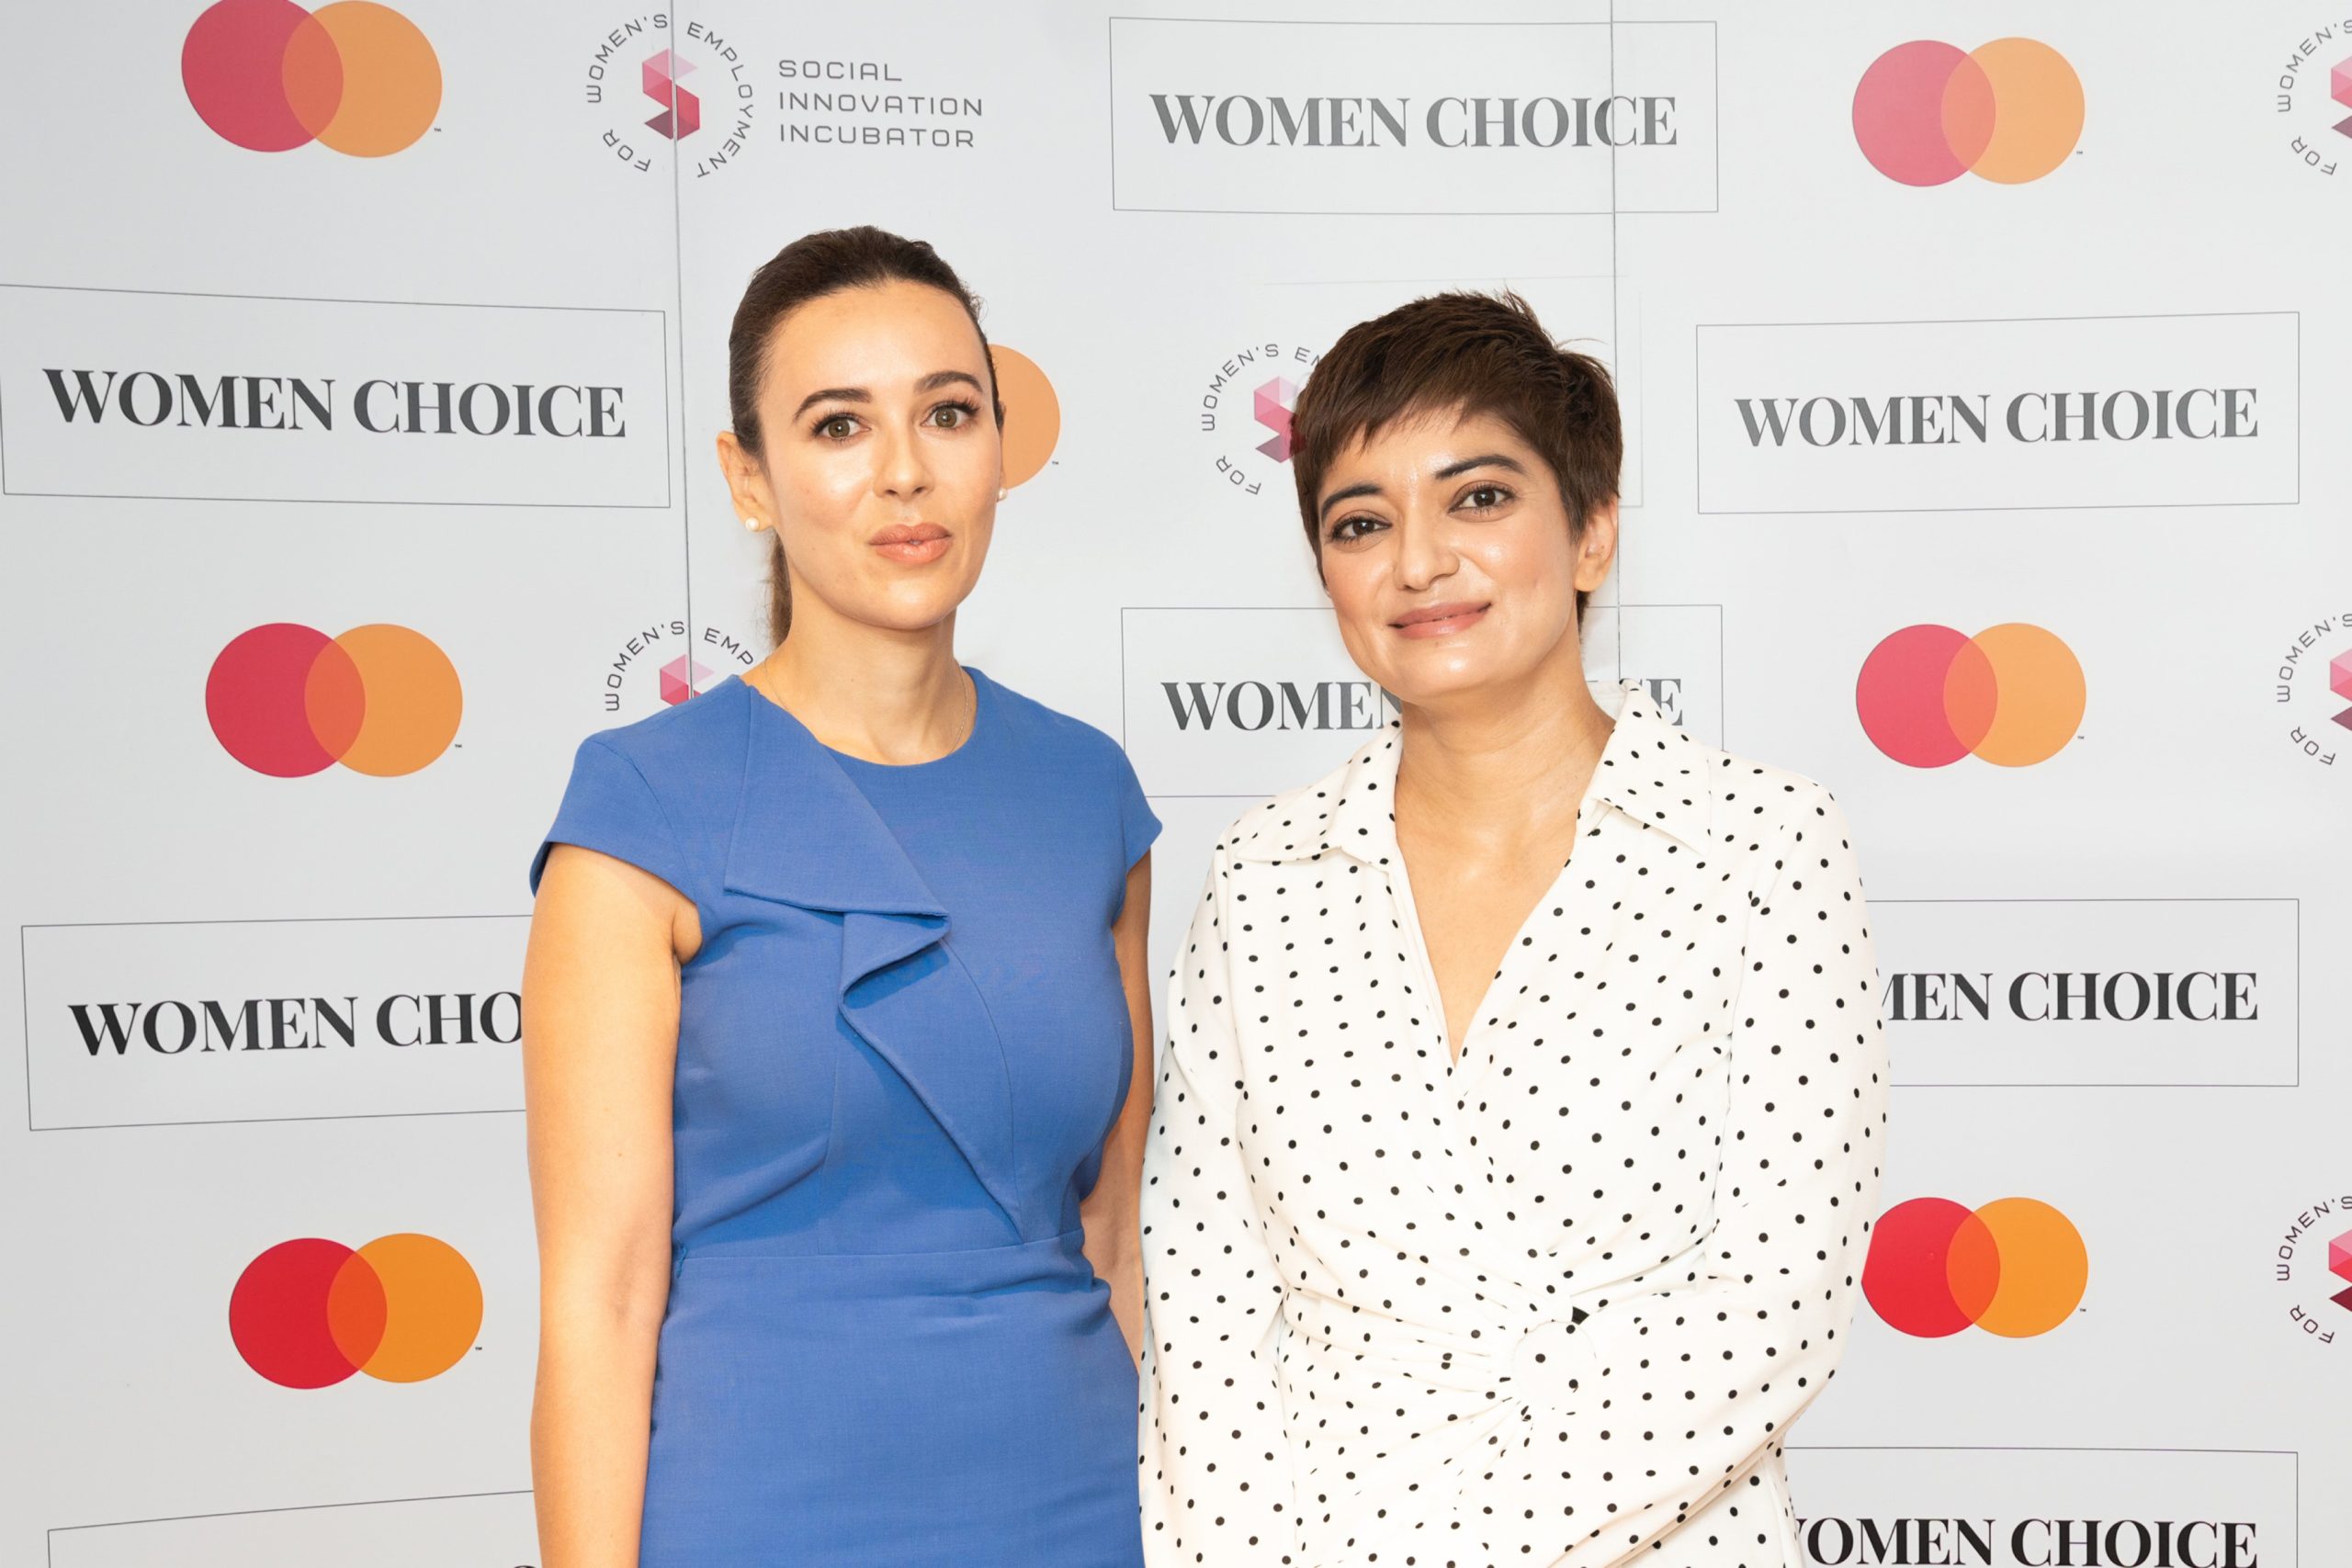 Mastercard and Women Choice expand partnership to further invest in the development of women entrepreneurs across Middle East and Africa